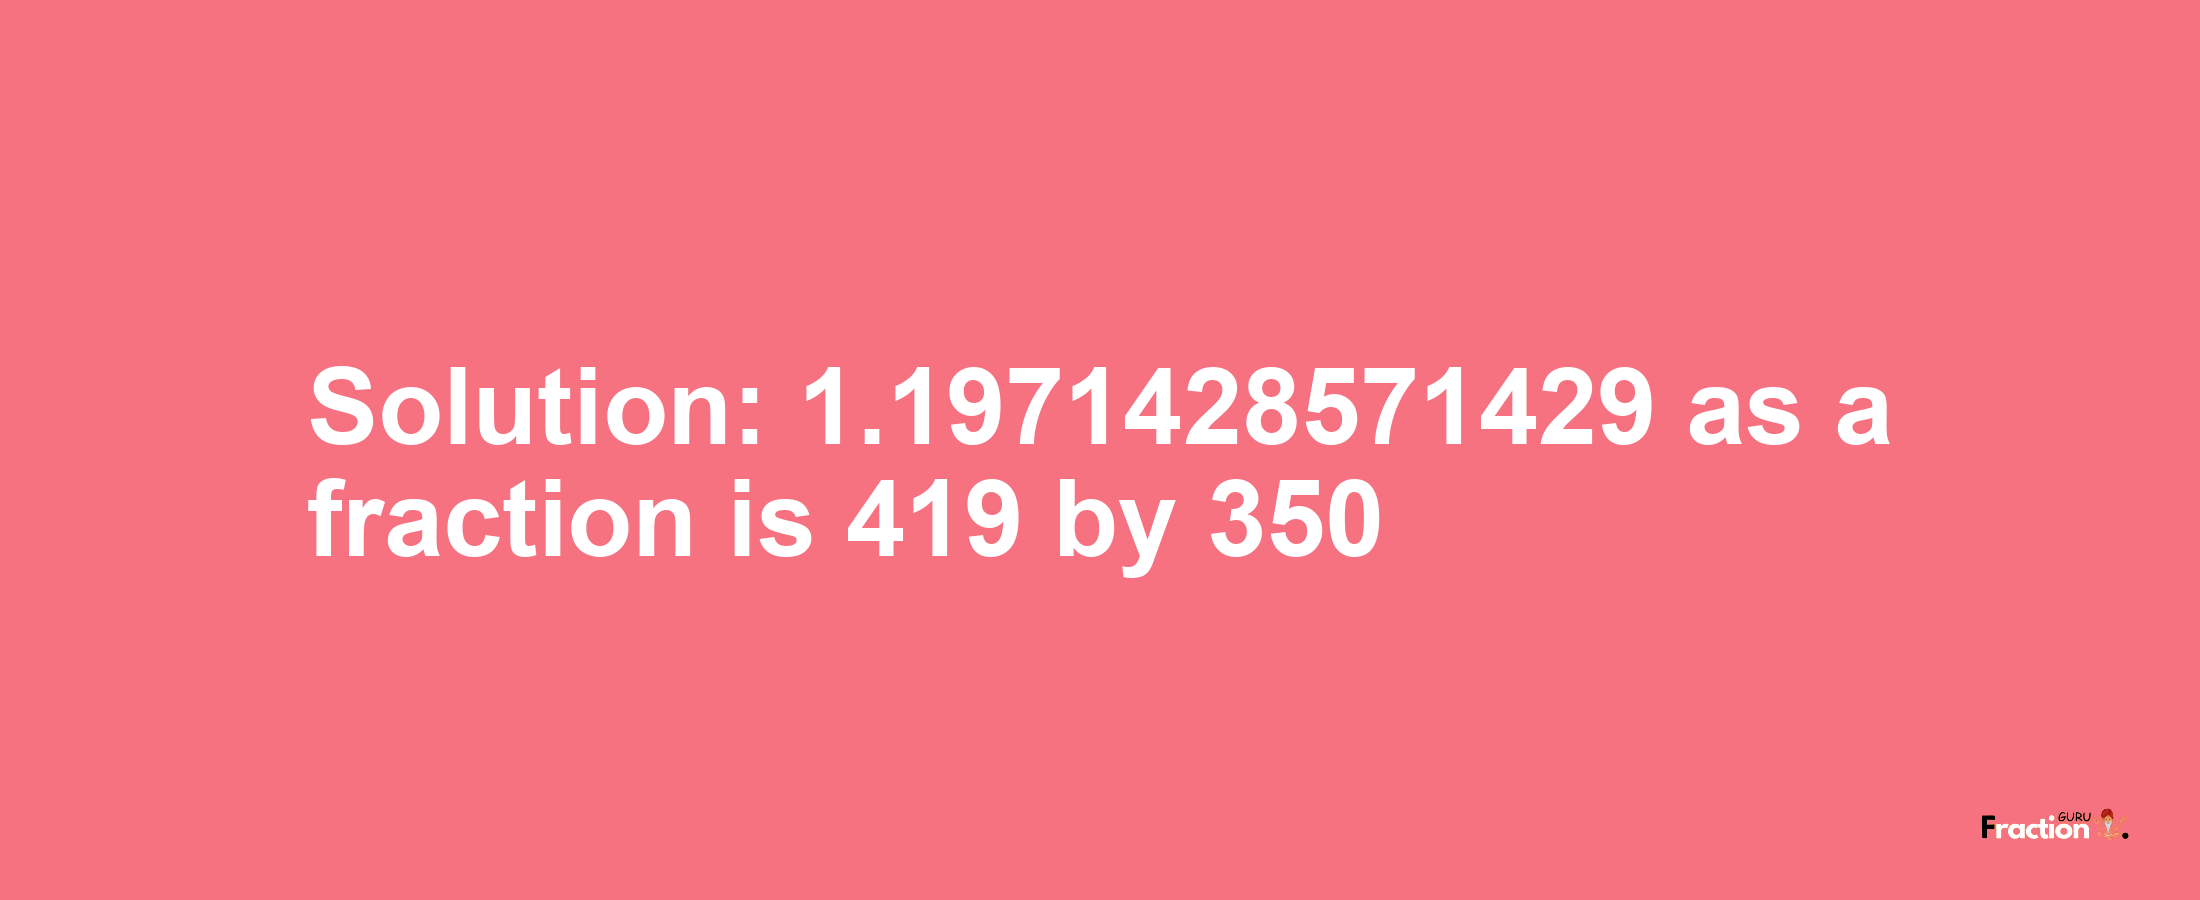 Solution:1.1971428571429 as a fraction is 419/350